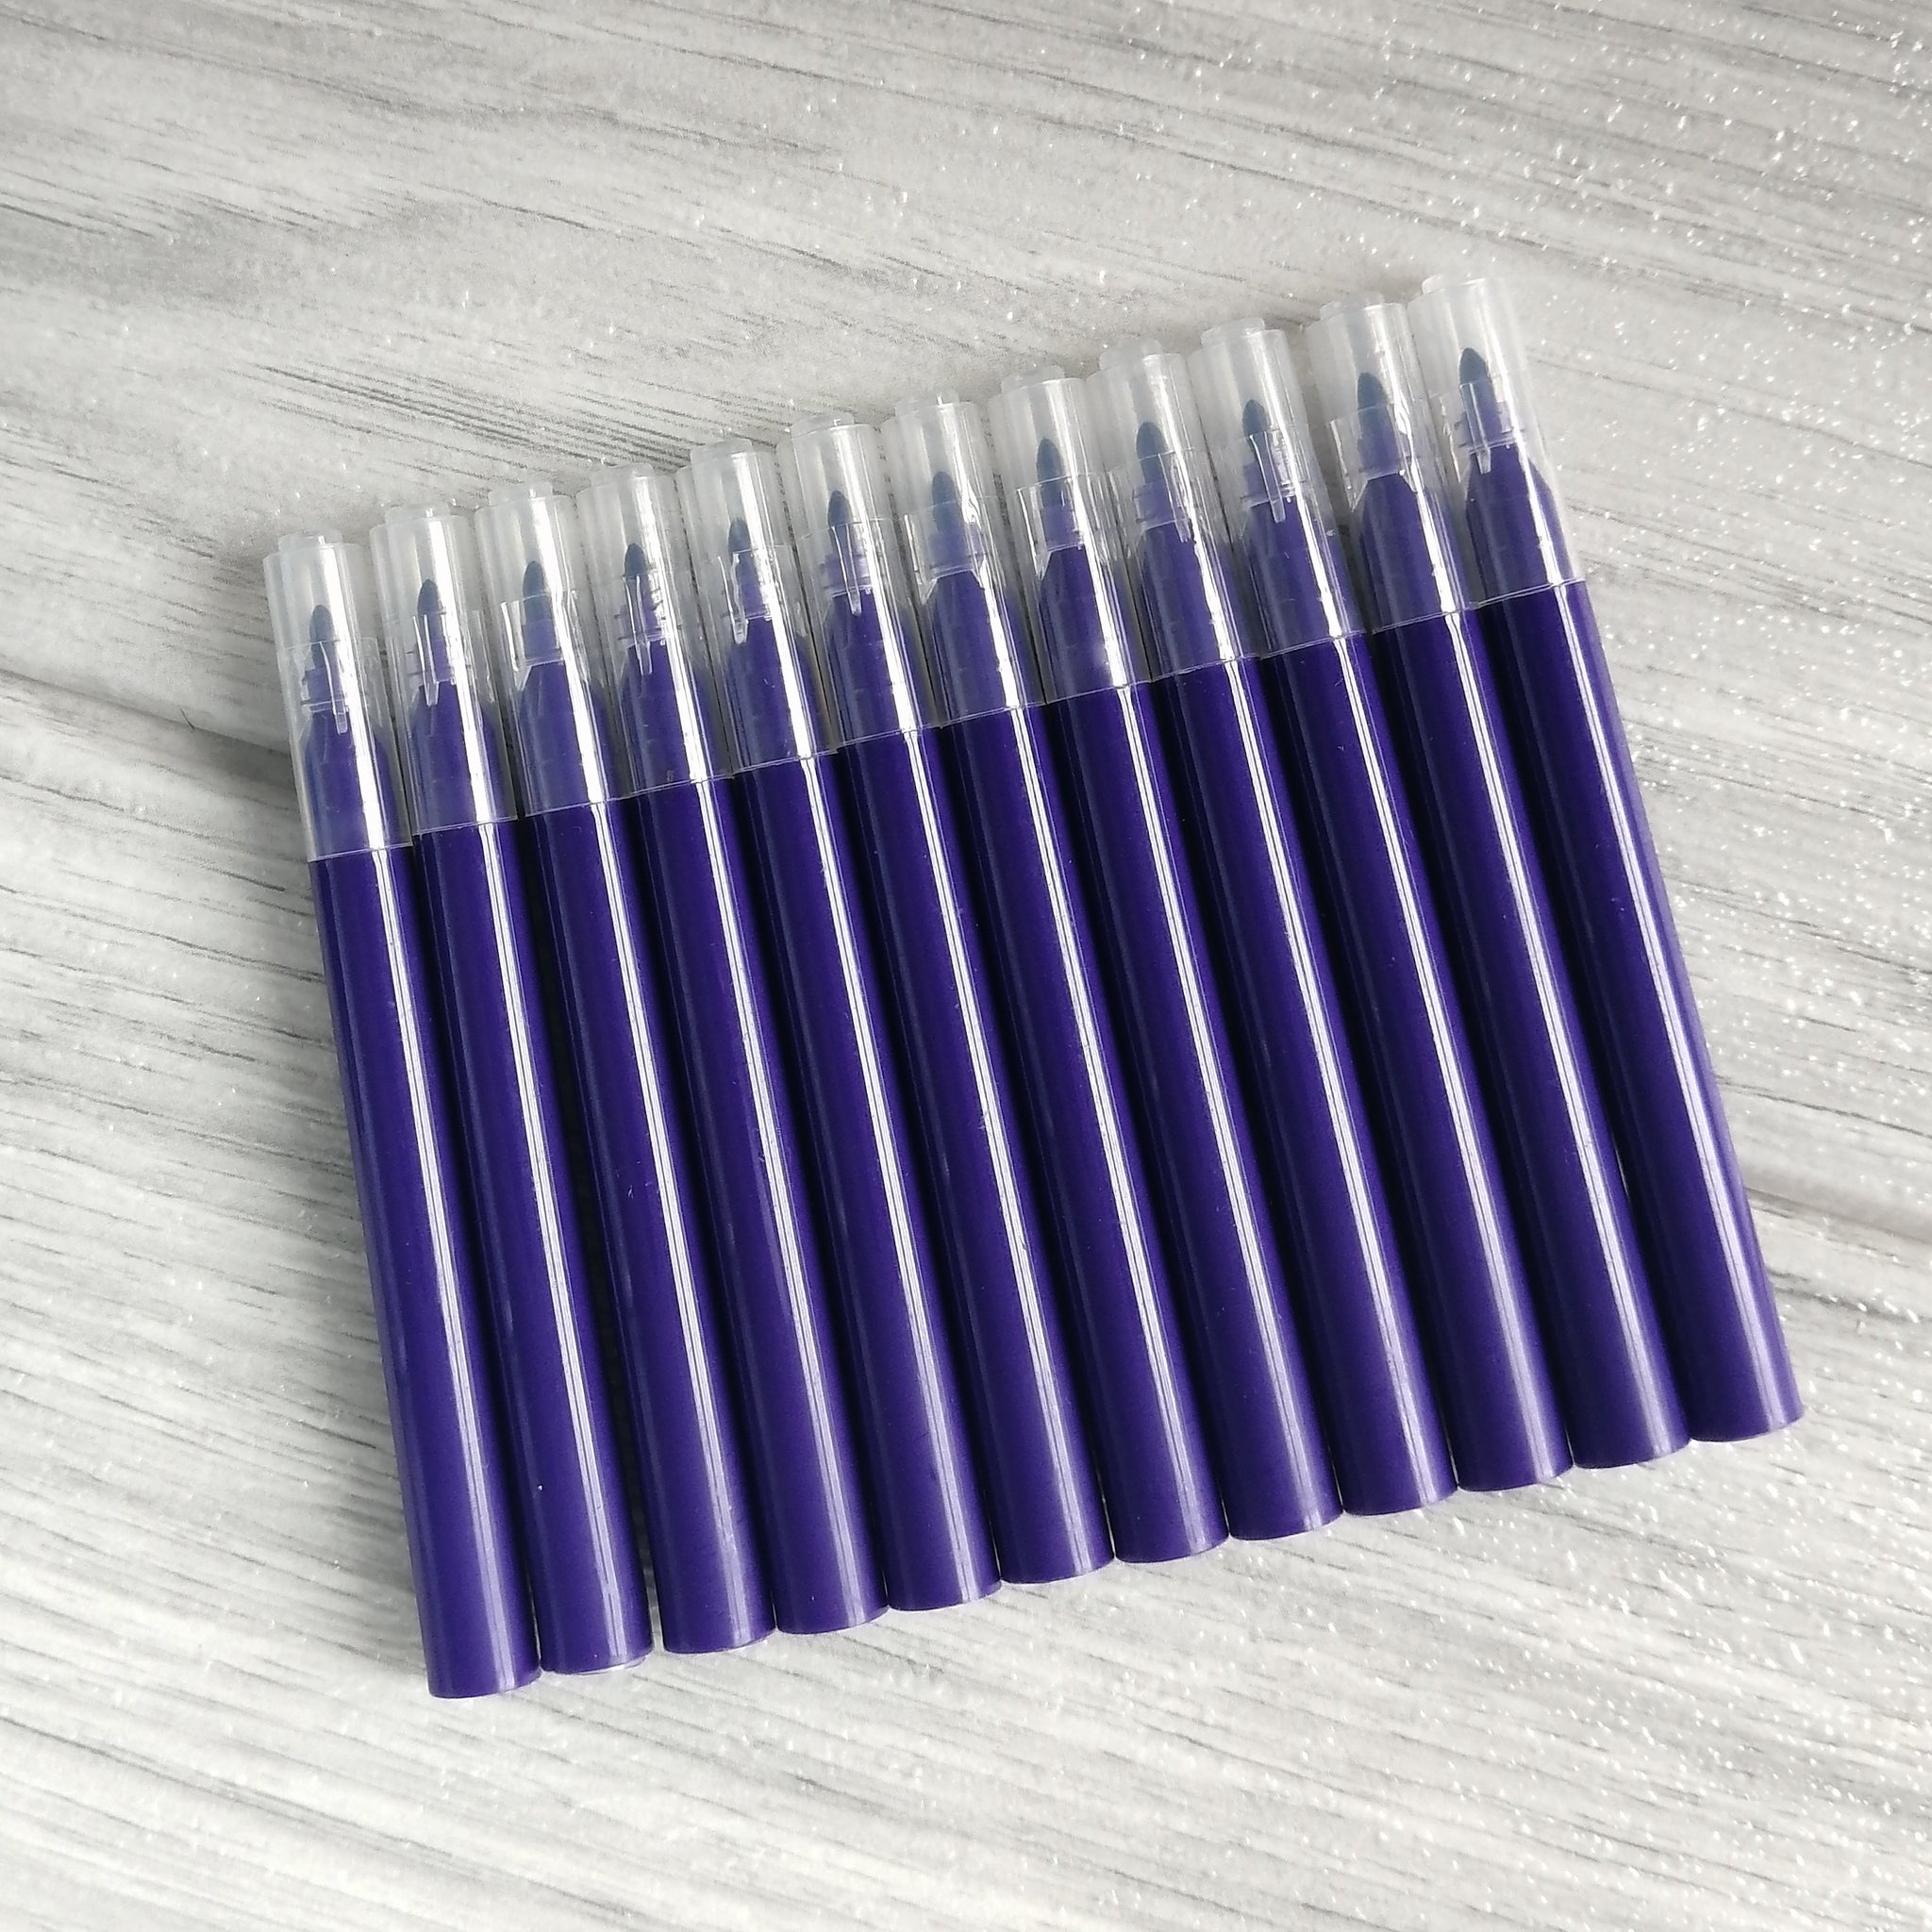 Mini Edible Markers - PURPLE PACK OF 12